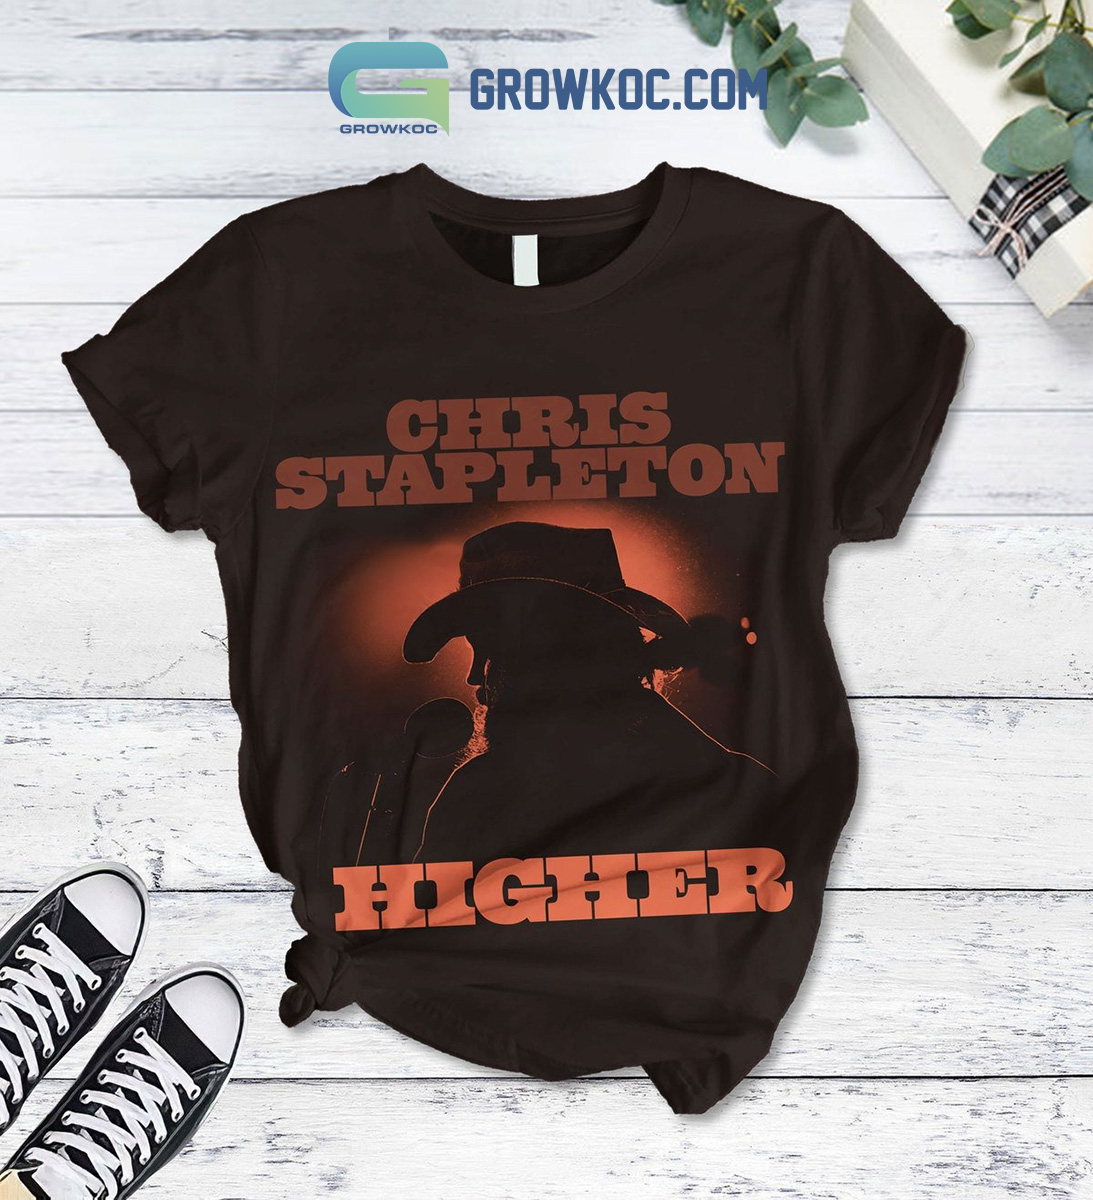 Chris Stapleton Higher Country Music Is Good For The Soul Smooth As Tennessee Whiskey Winter Holiday Fleece Pajama Sets